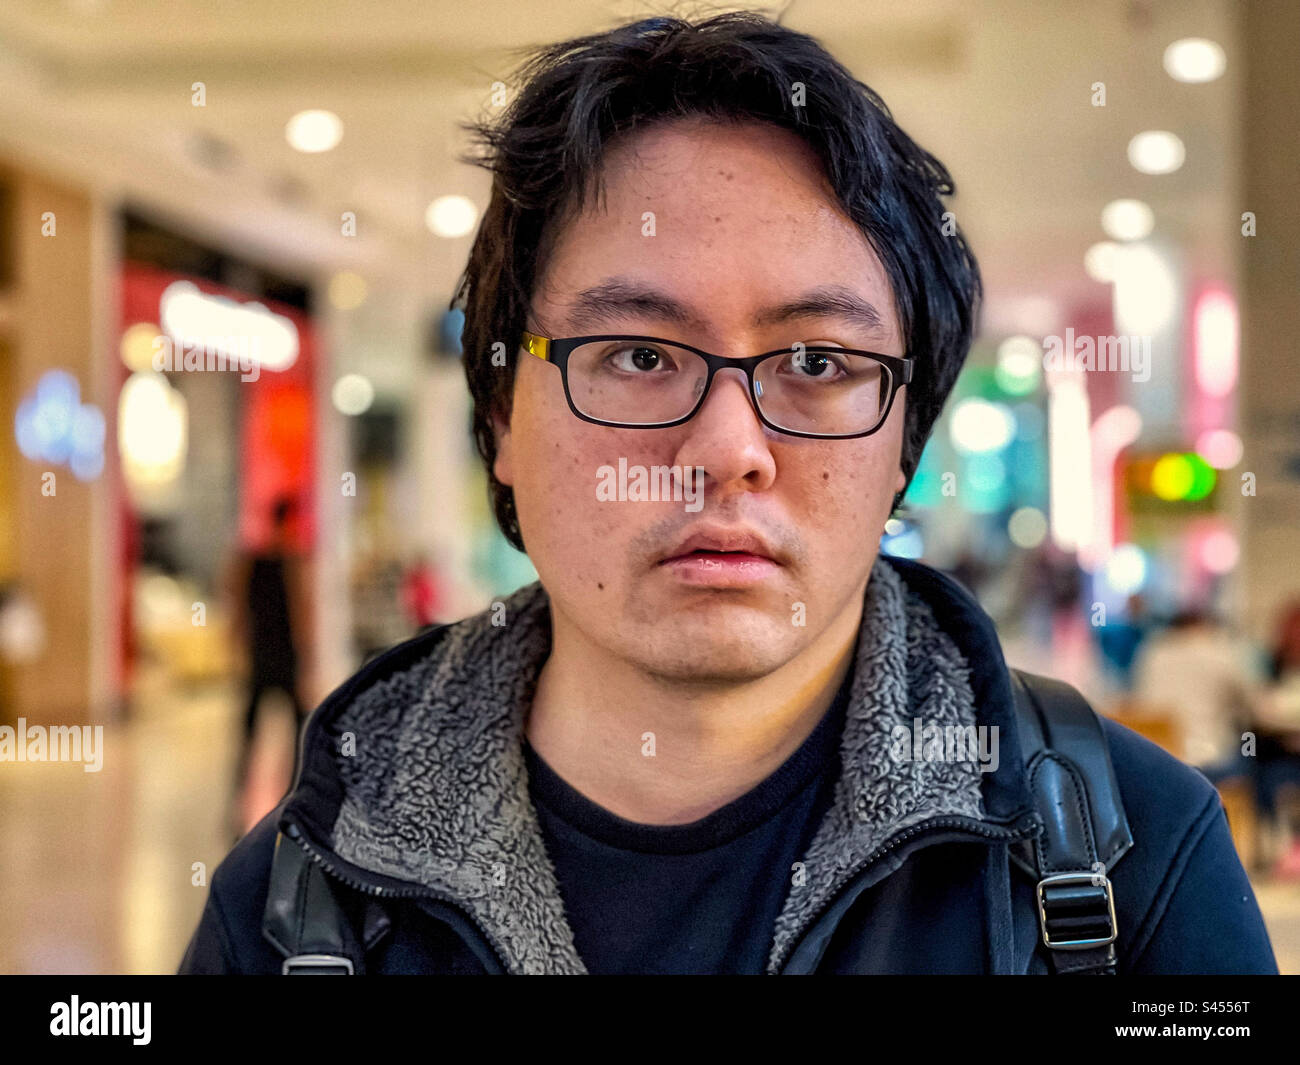 Close-up portrait of young Asian man in eyeglasses against lights inside shopping mall. Focus on foreground. Stock Photo